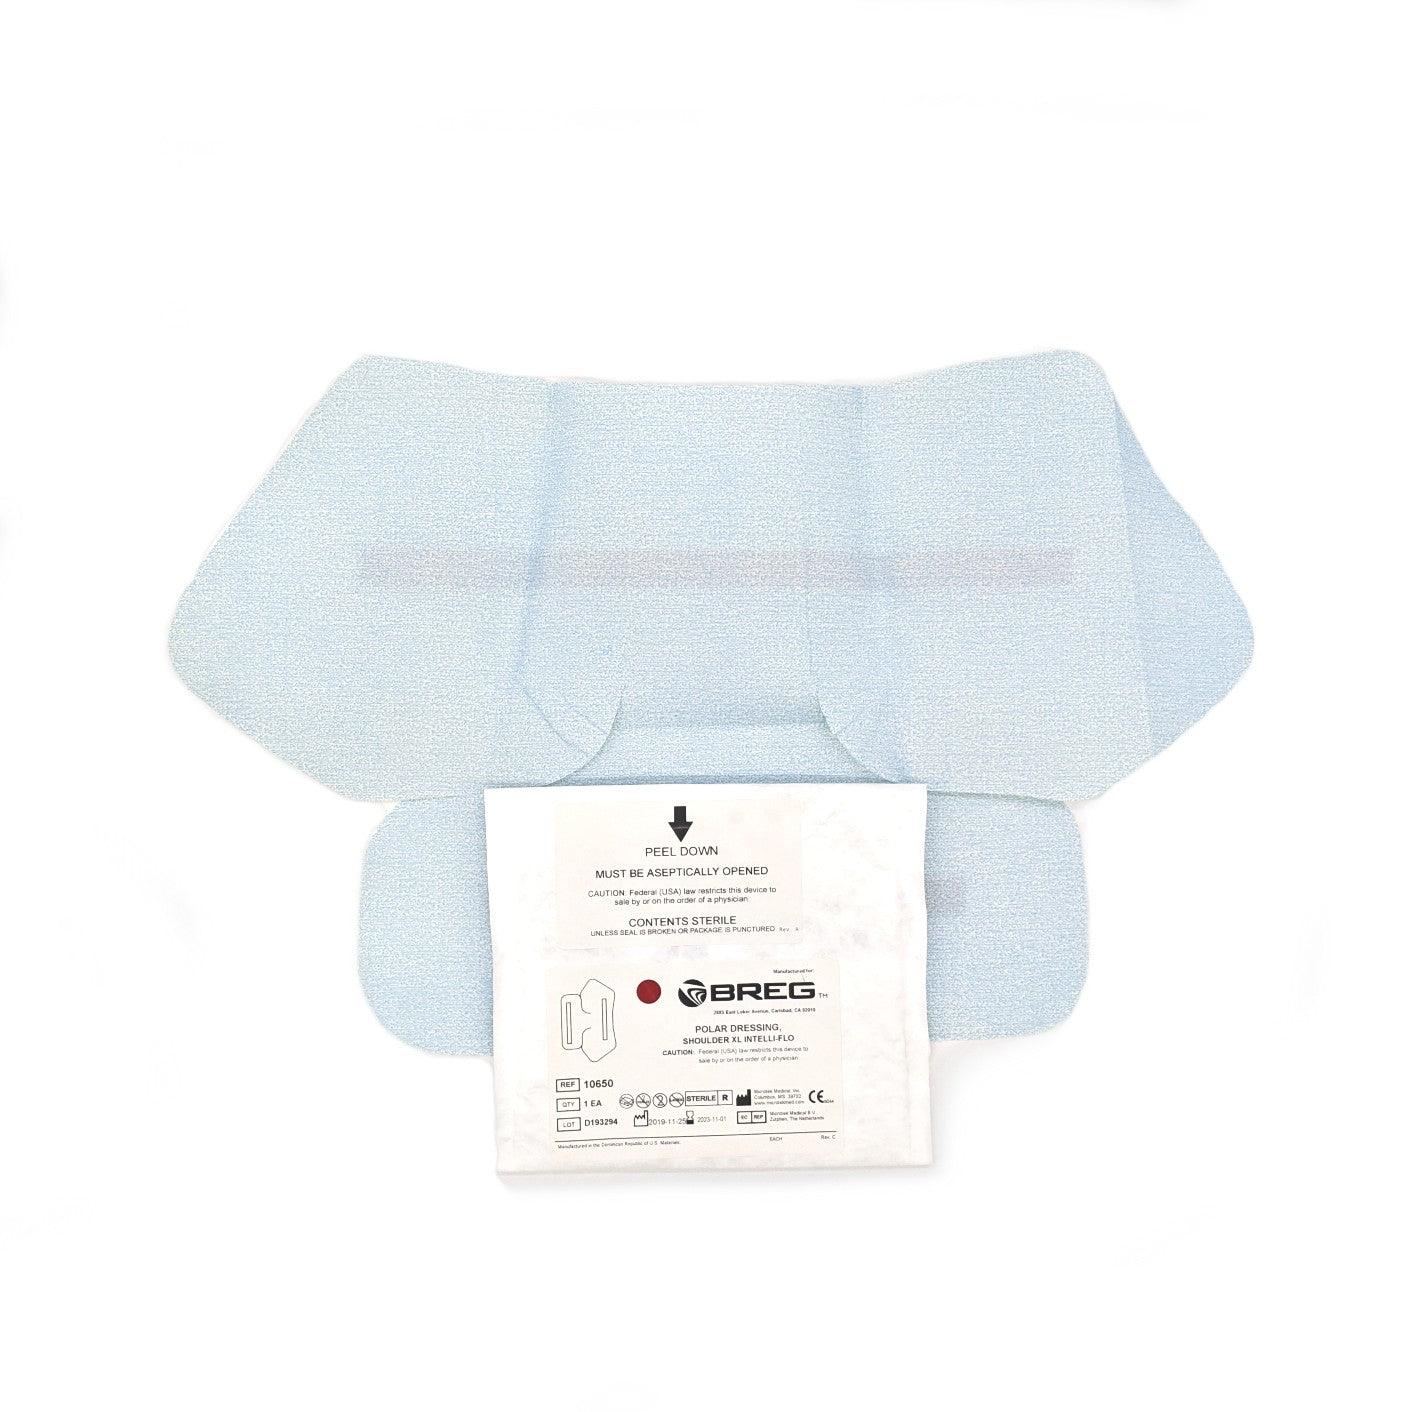 Breg® Polar Care Kodiak Sterile Intelli-Flo Dressings - 10650 Breg® Polar Care Kodiak Sterile Intelli-Flo Dressings - undefined by Supply Physical Therapy Accessories, Breg, Breg Accessories, Replacement, Sterile Dressings, Wraps